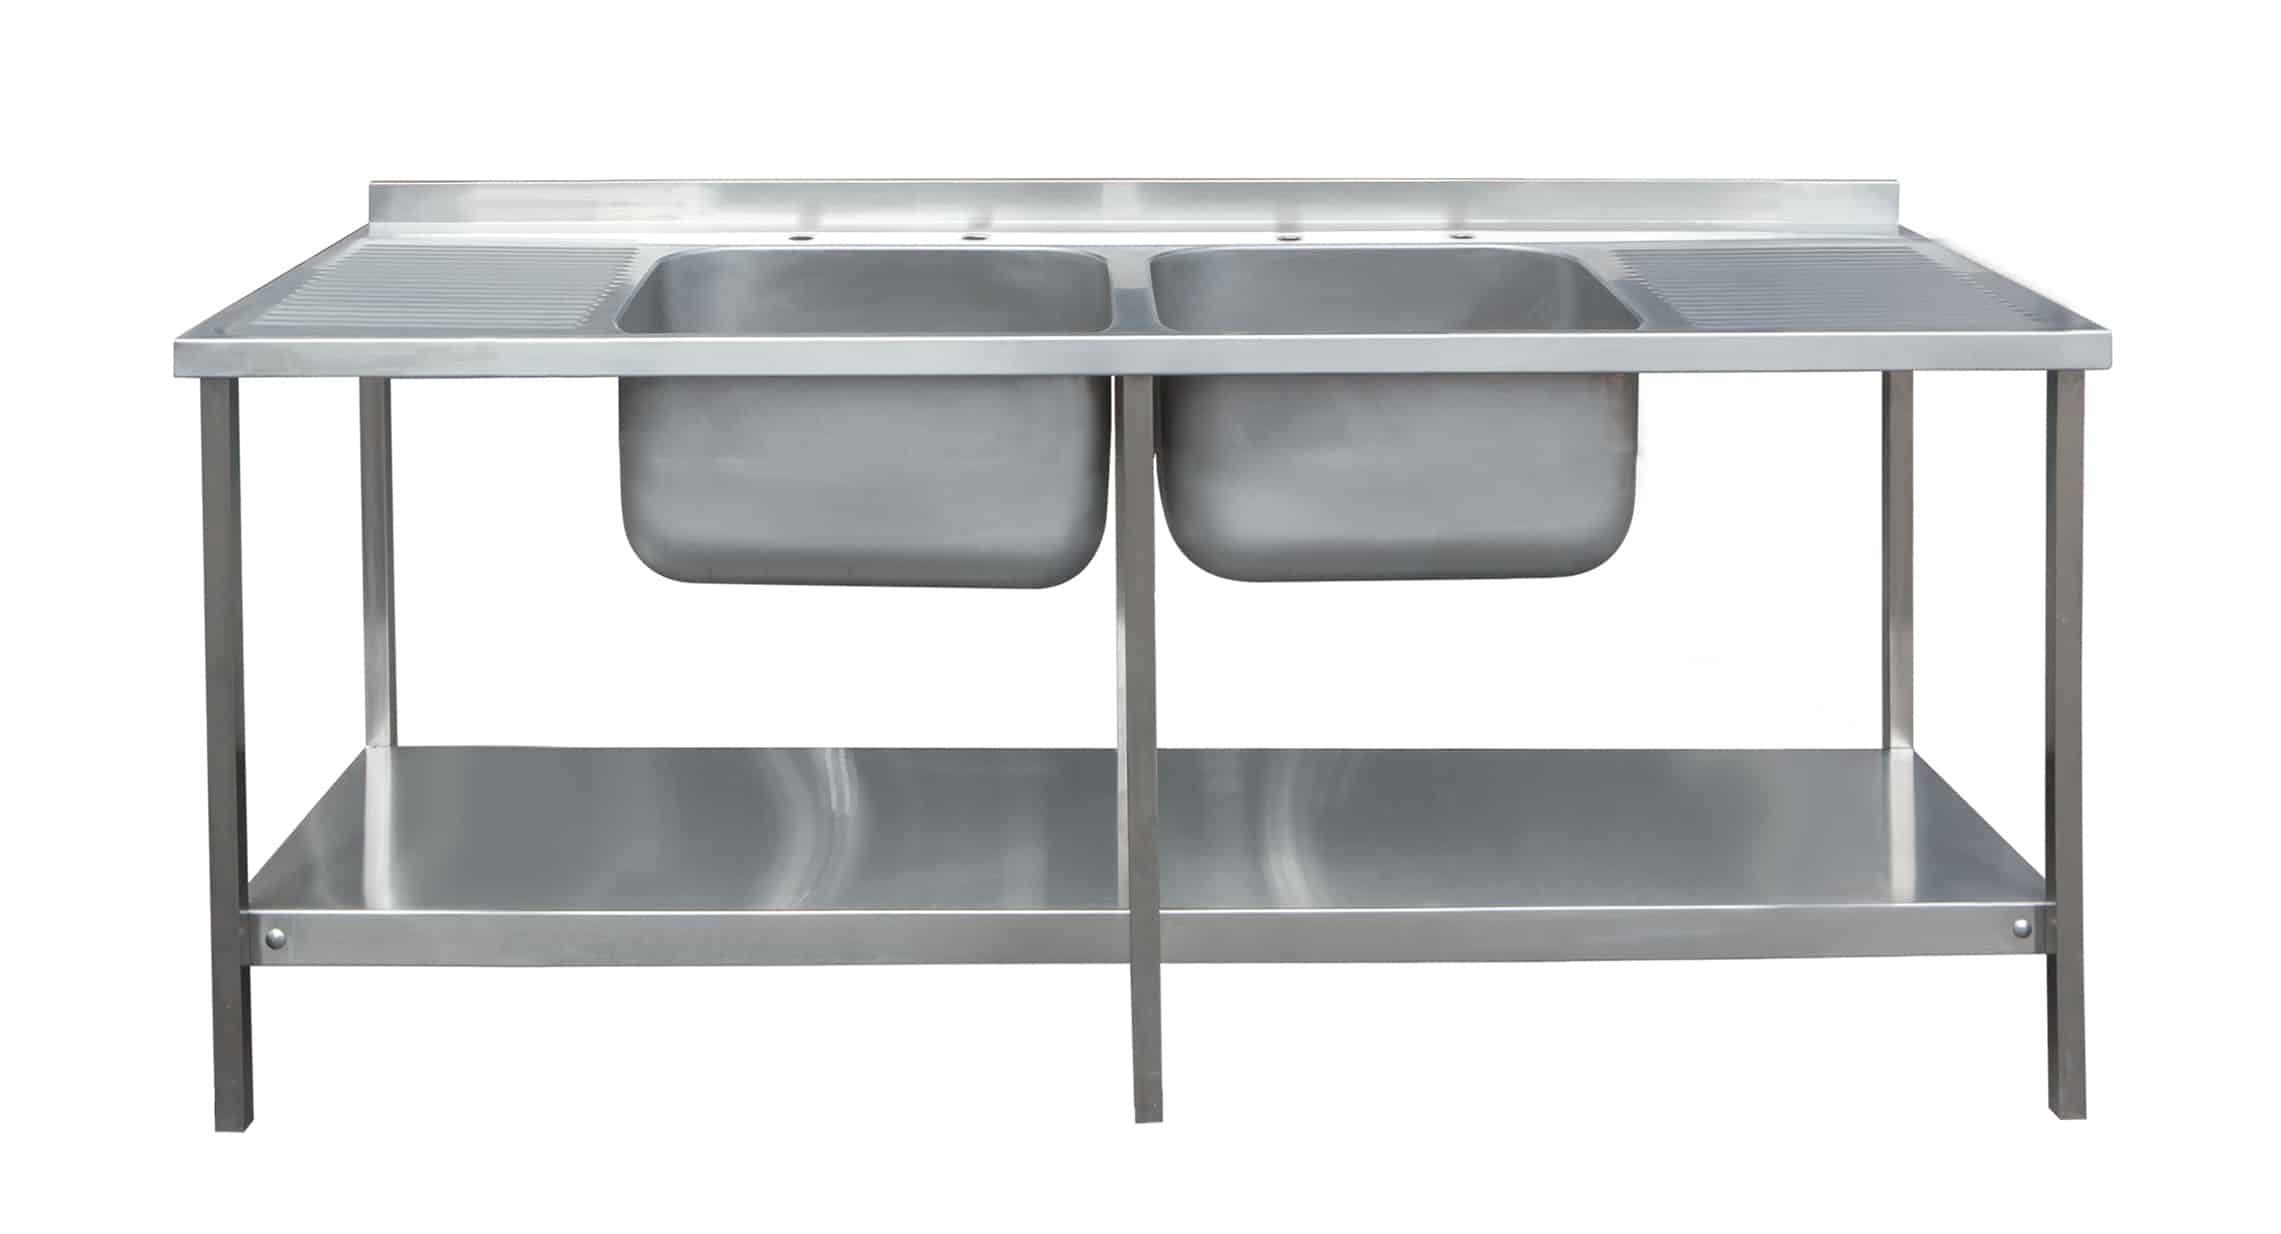 Stainless steel double bowl sink with drainer and under shelf